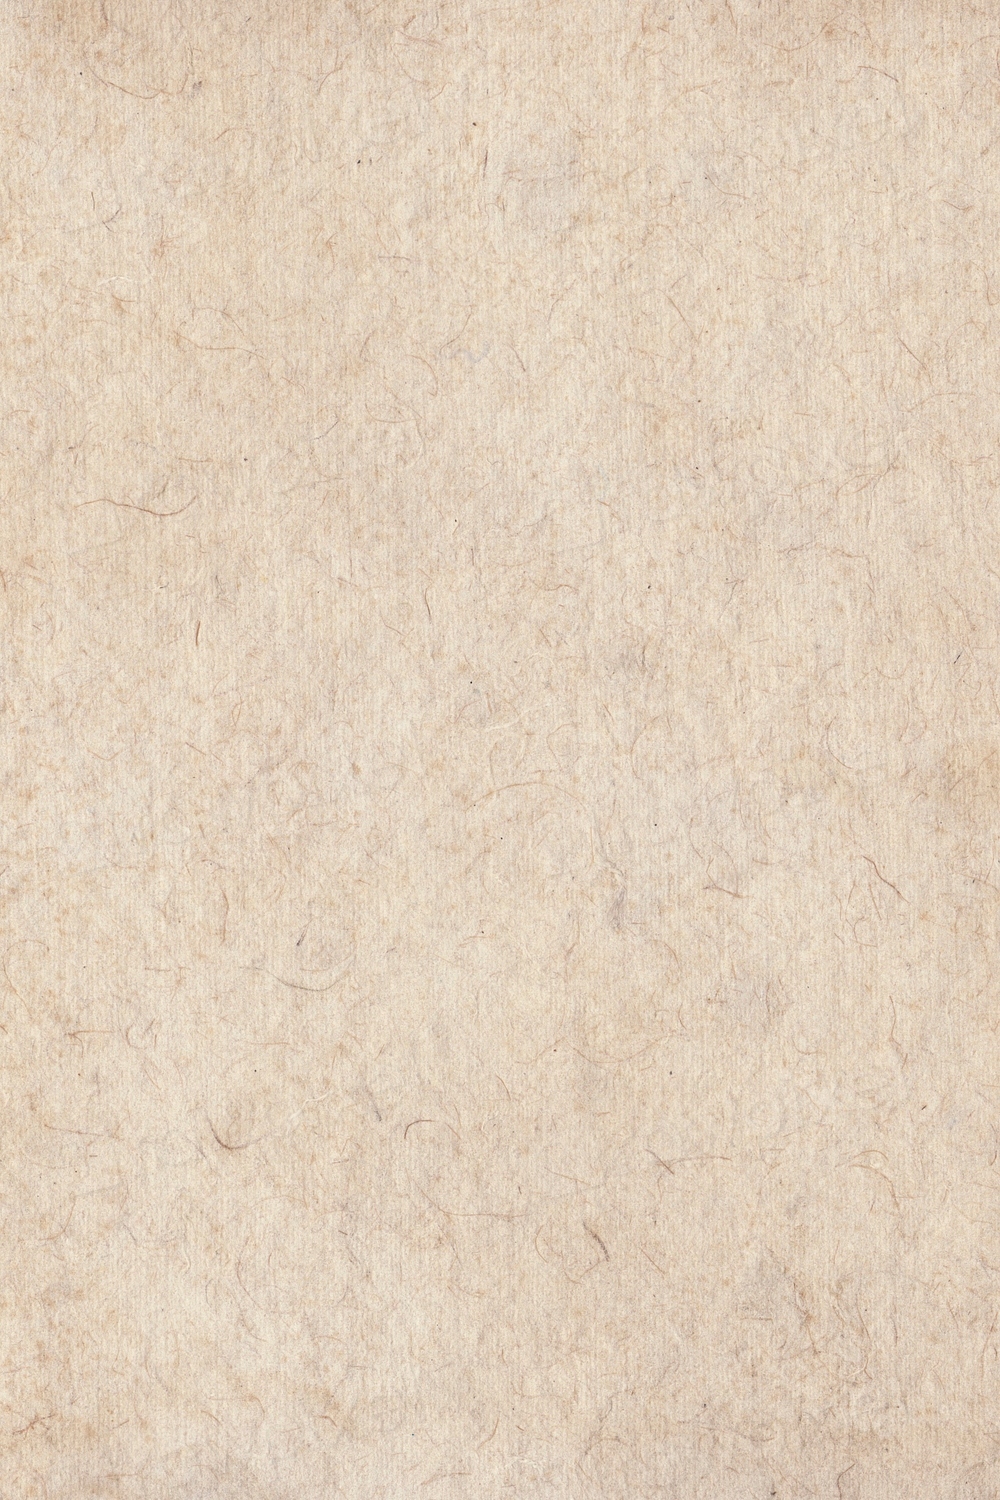 Old paper texture, beige background, | Free Photo - rawpixel